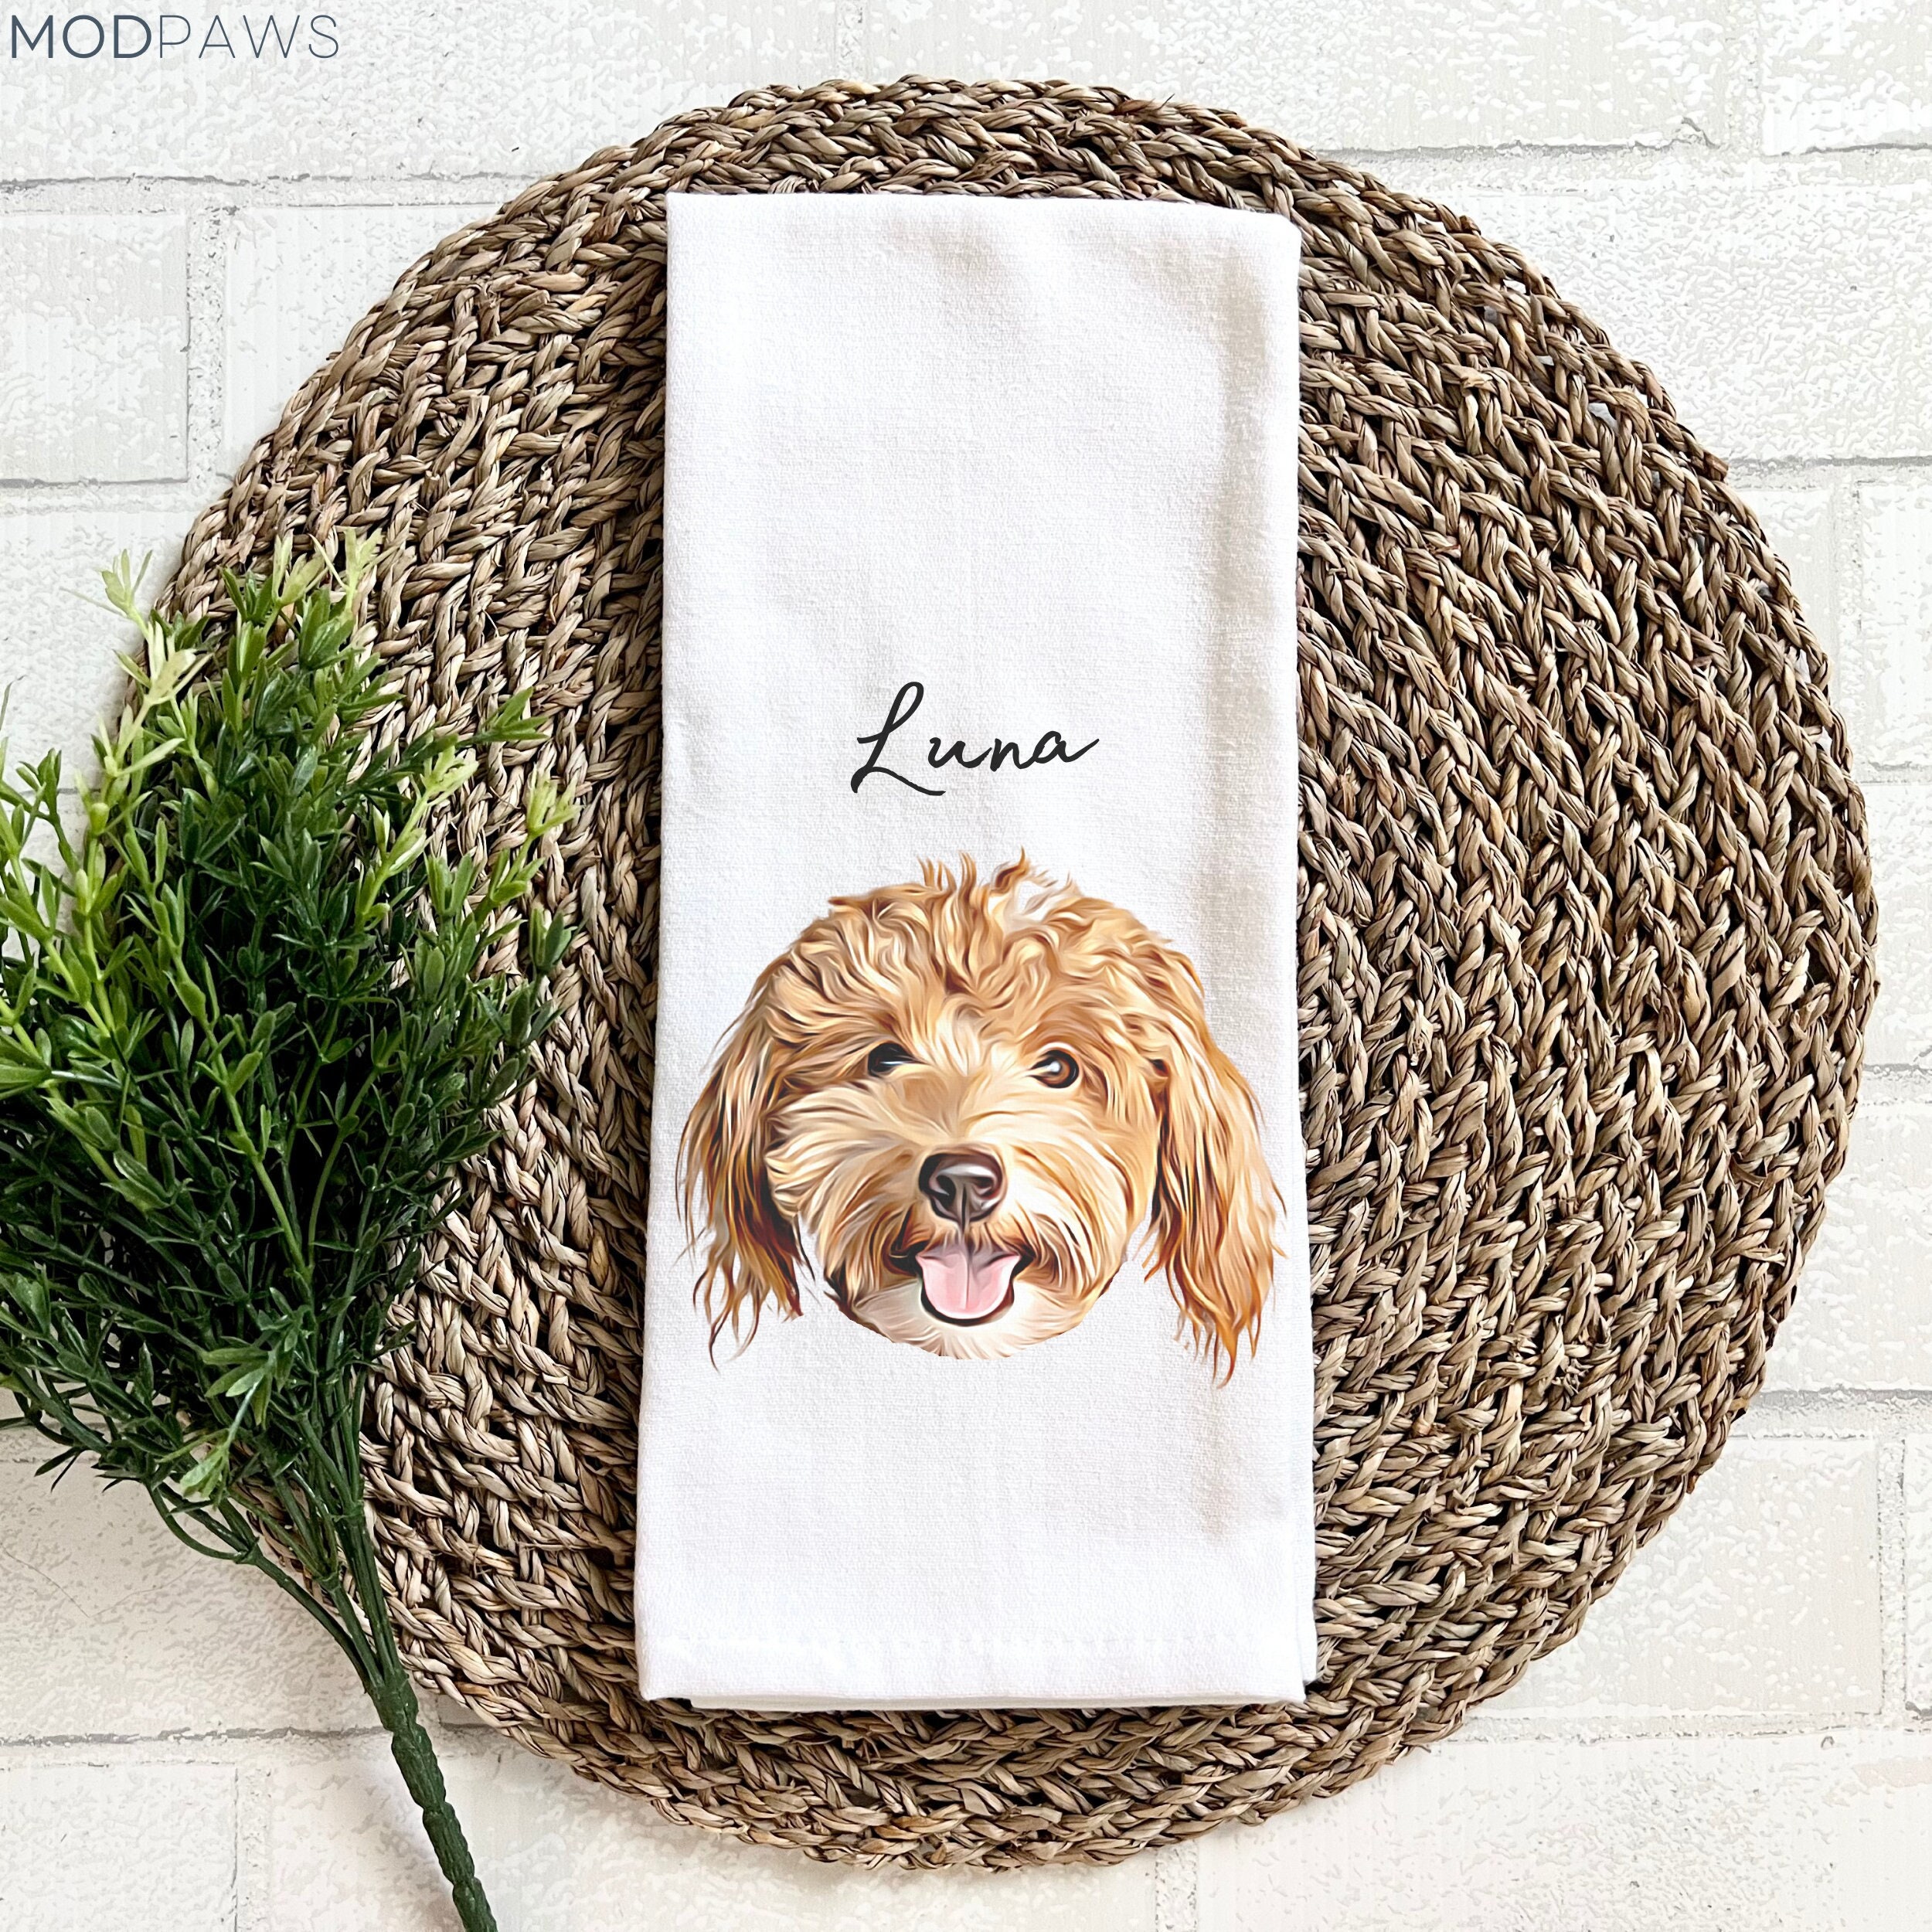 Show the love for your dog in the kitchen with these dog-themed